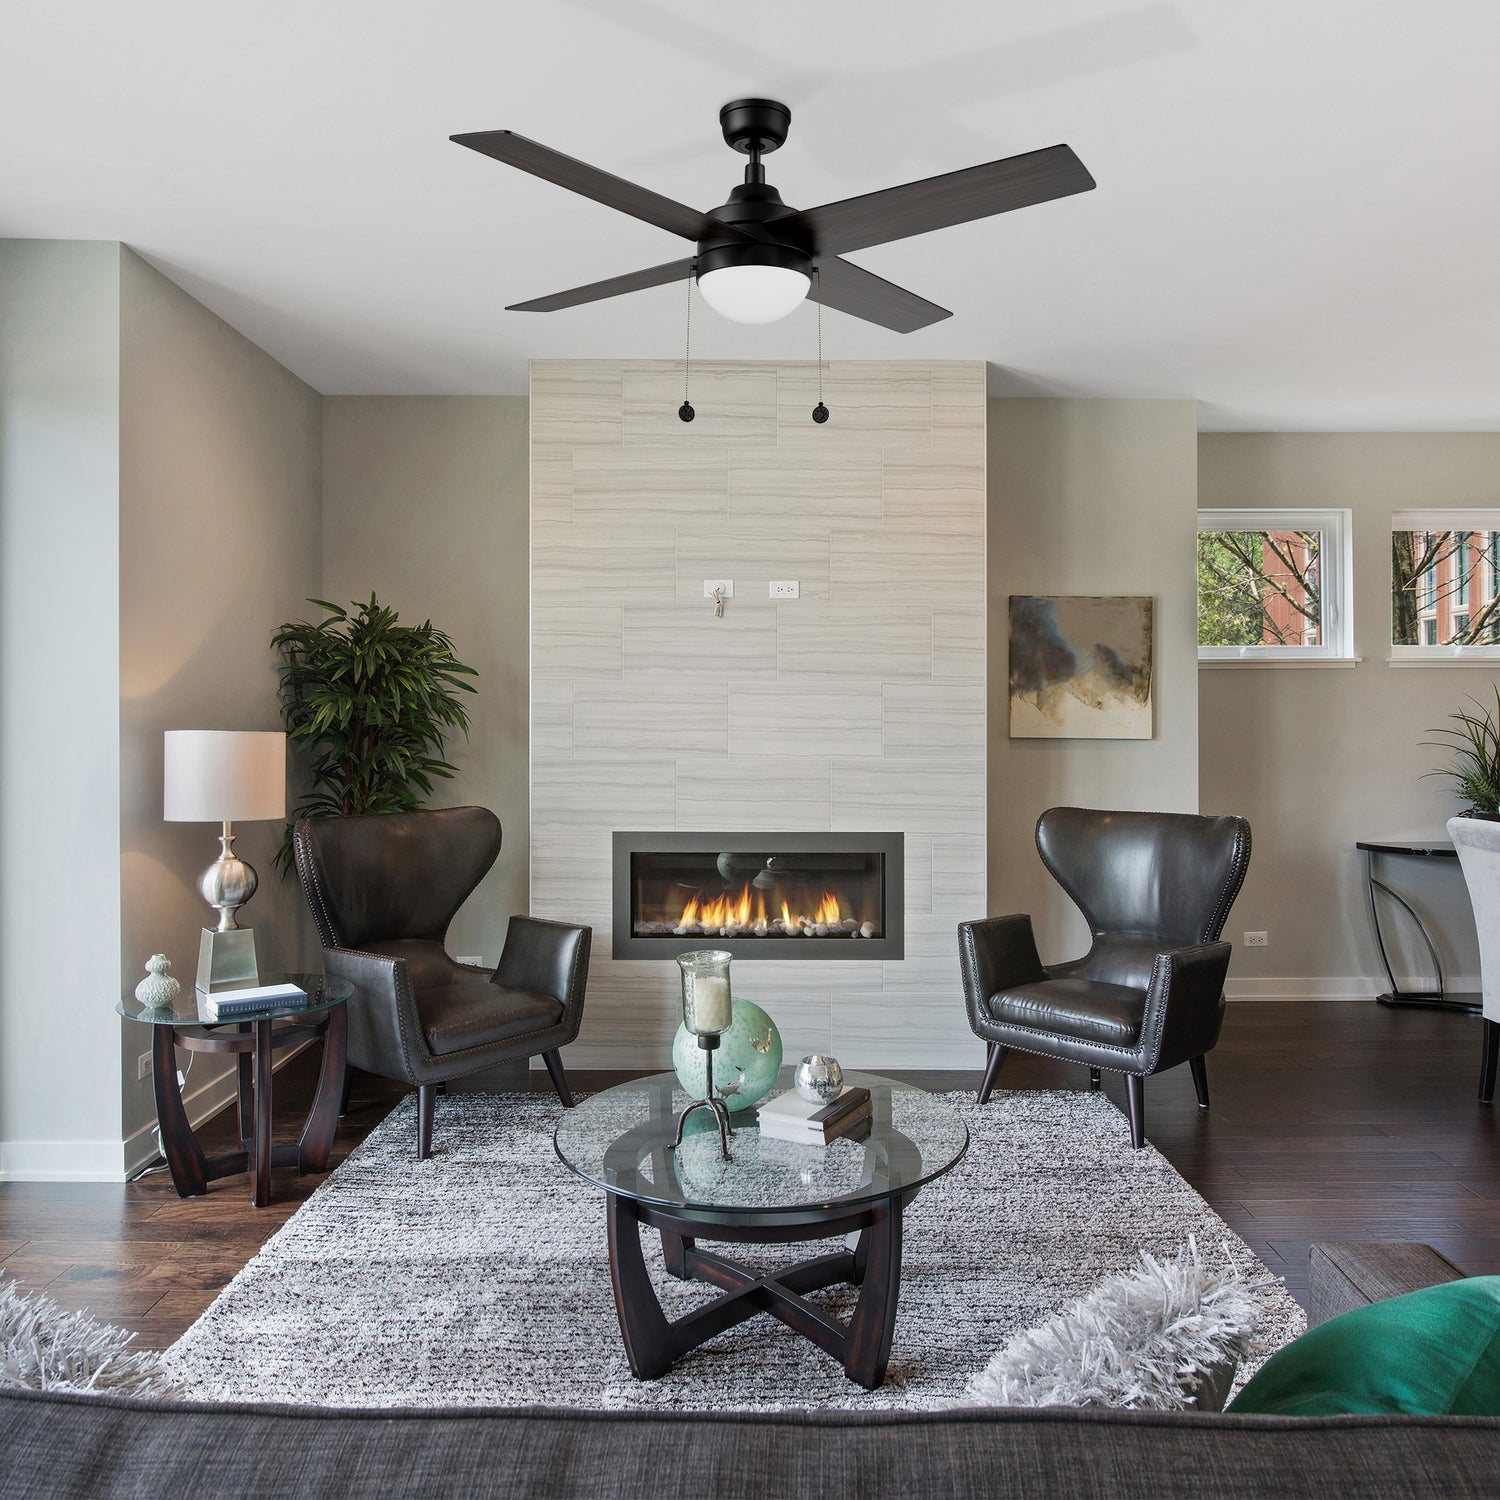 52-inch dowrnrod mount black ceiling fan with LED light, matching to black leather sofa, the black wooden stand glass coffee table, and the cool decorative fireplace, the whole bedroom is very modern. 